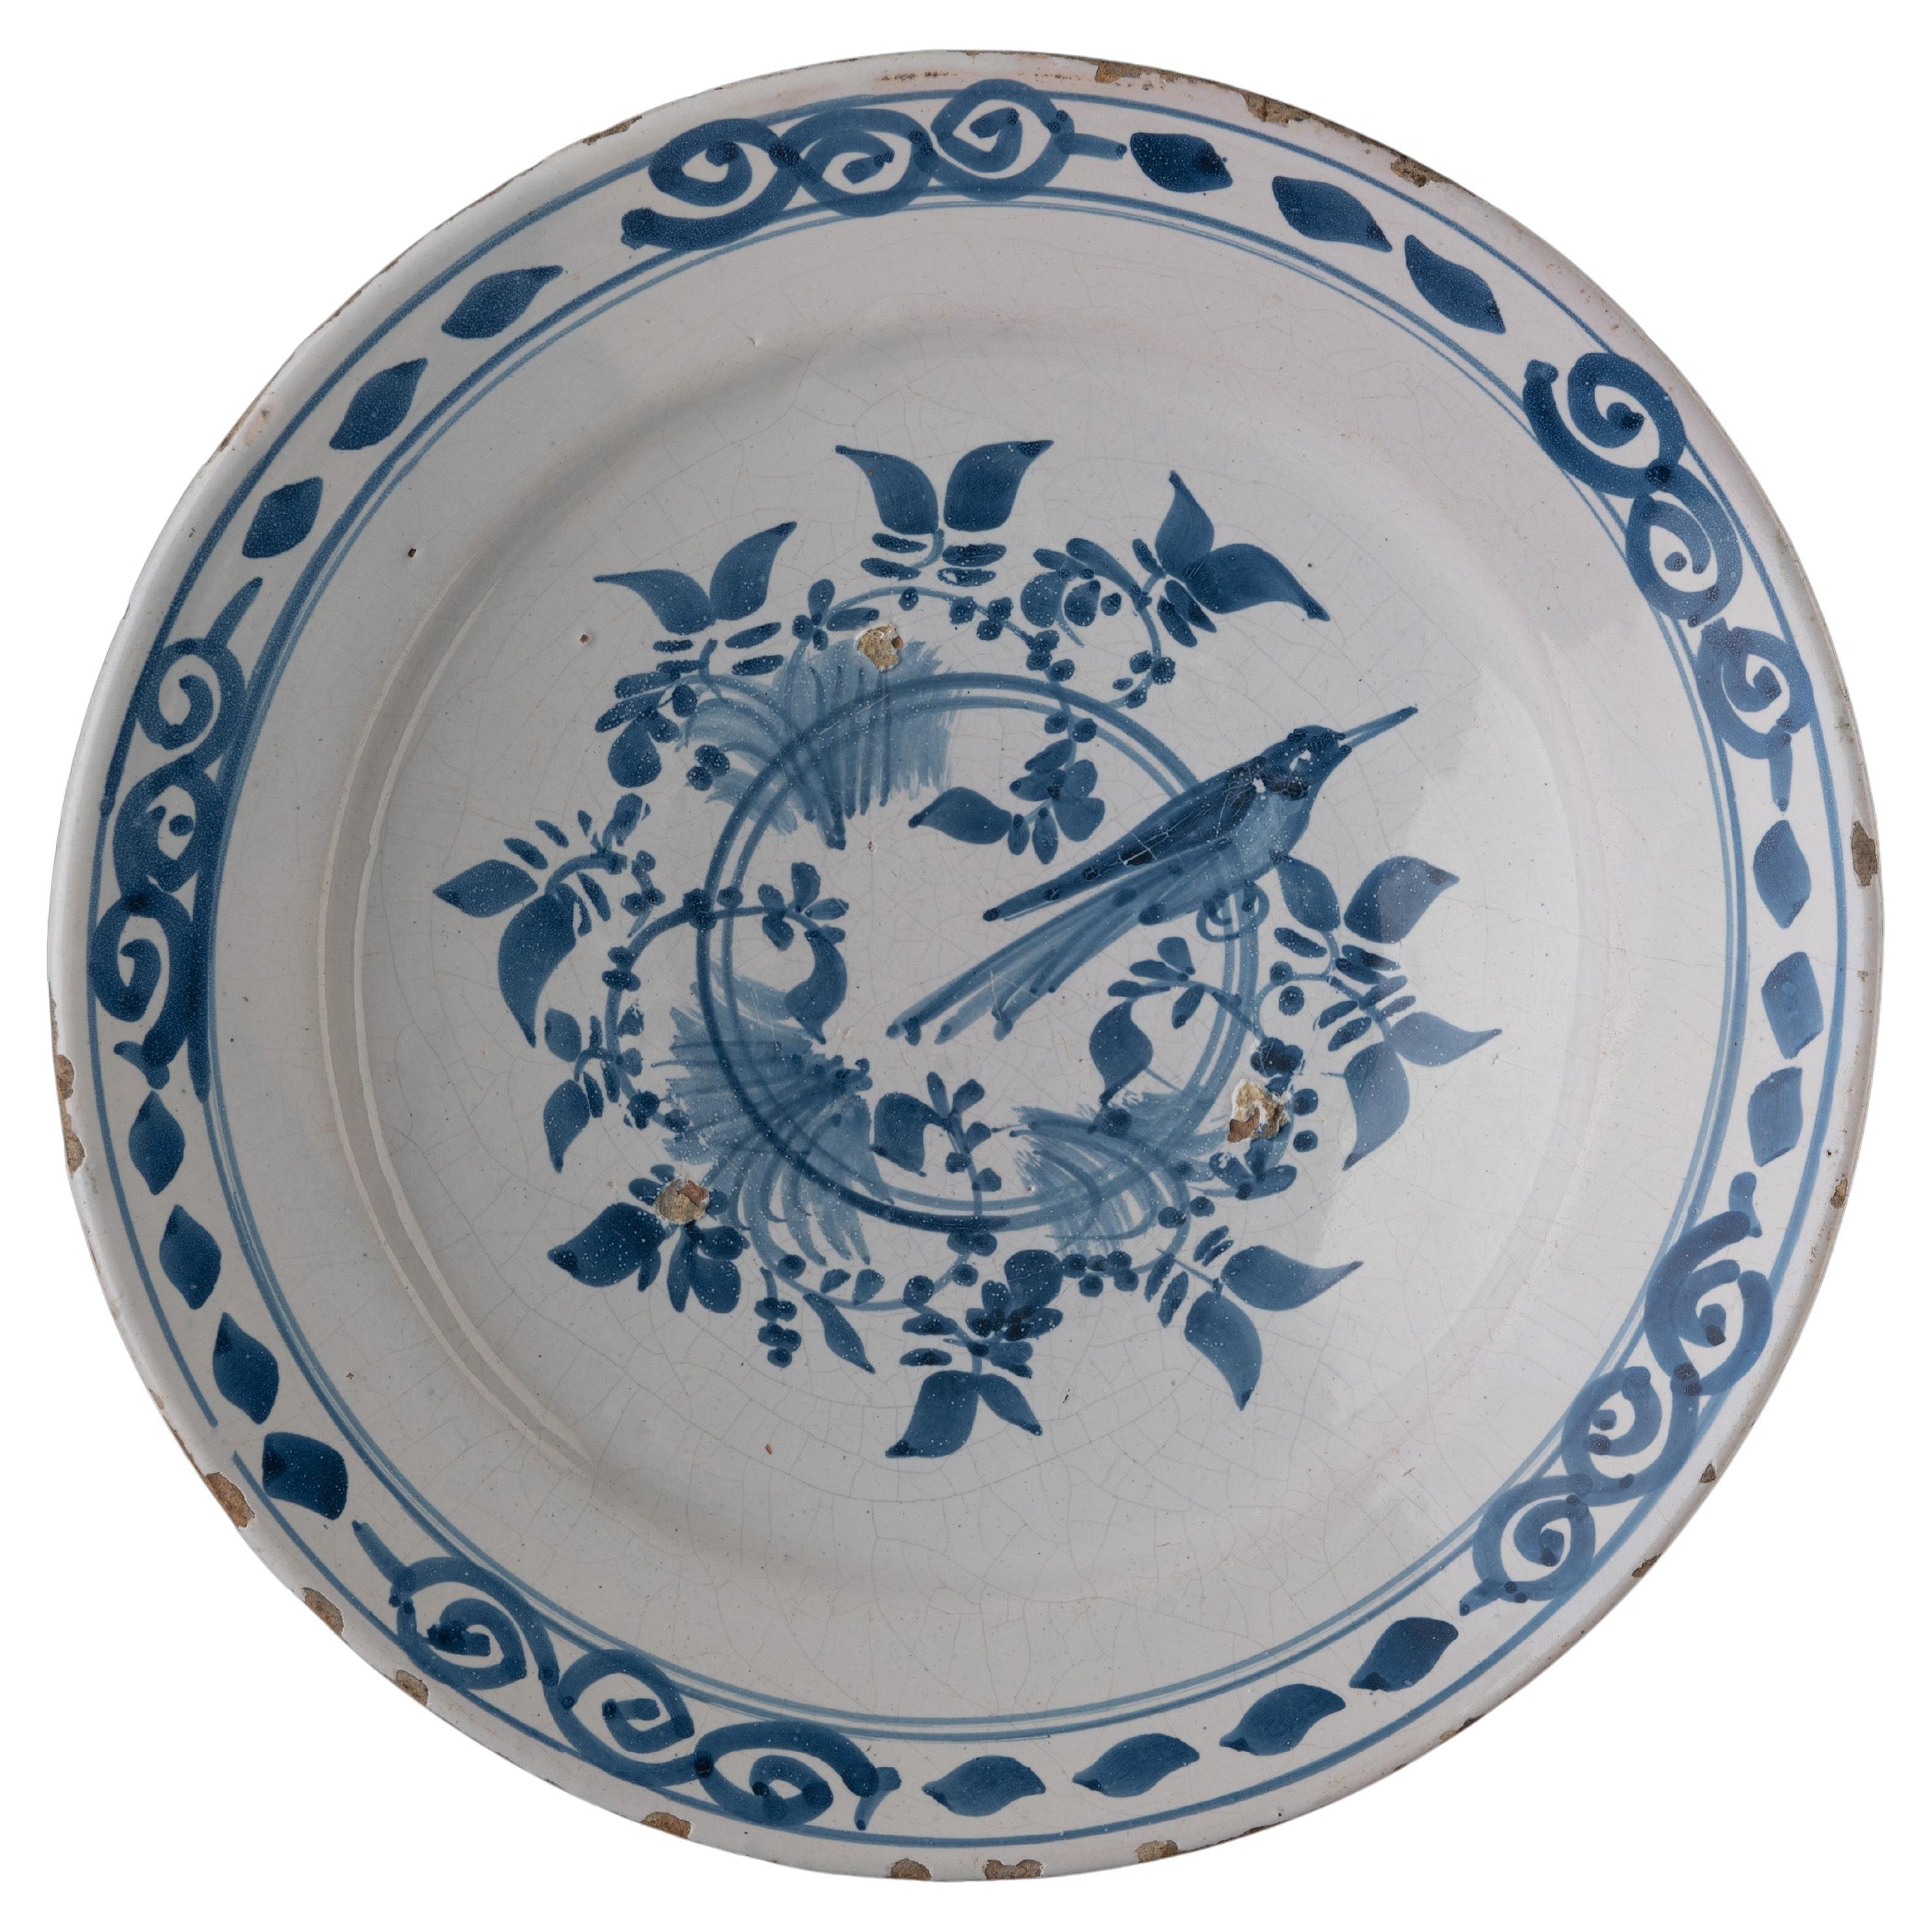 Delft Blue and White Dish with Bird on a Double Ring, 1700-1750